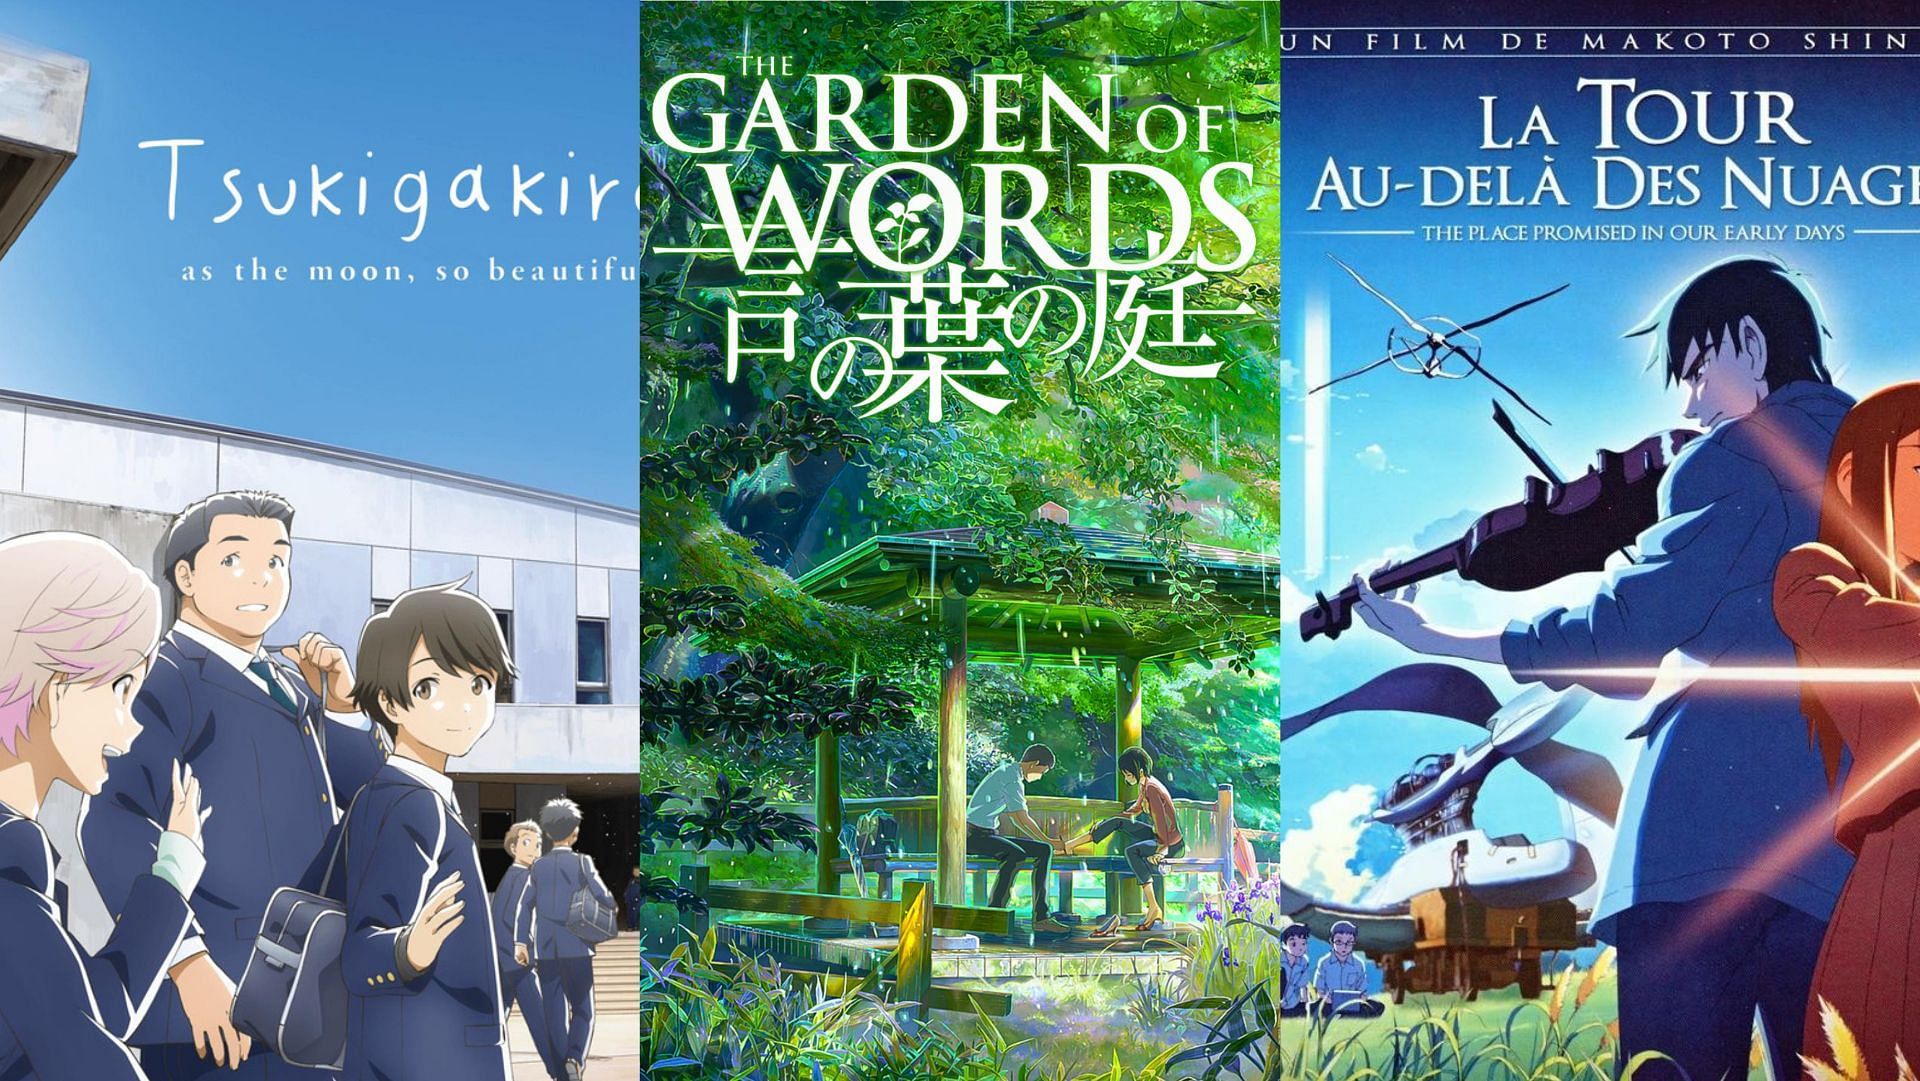 8 anime to watch if you are a fan of 5 Centimeters Per Second